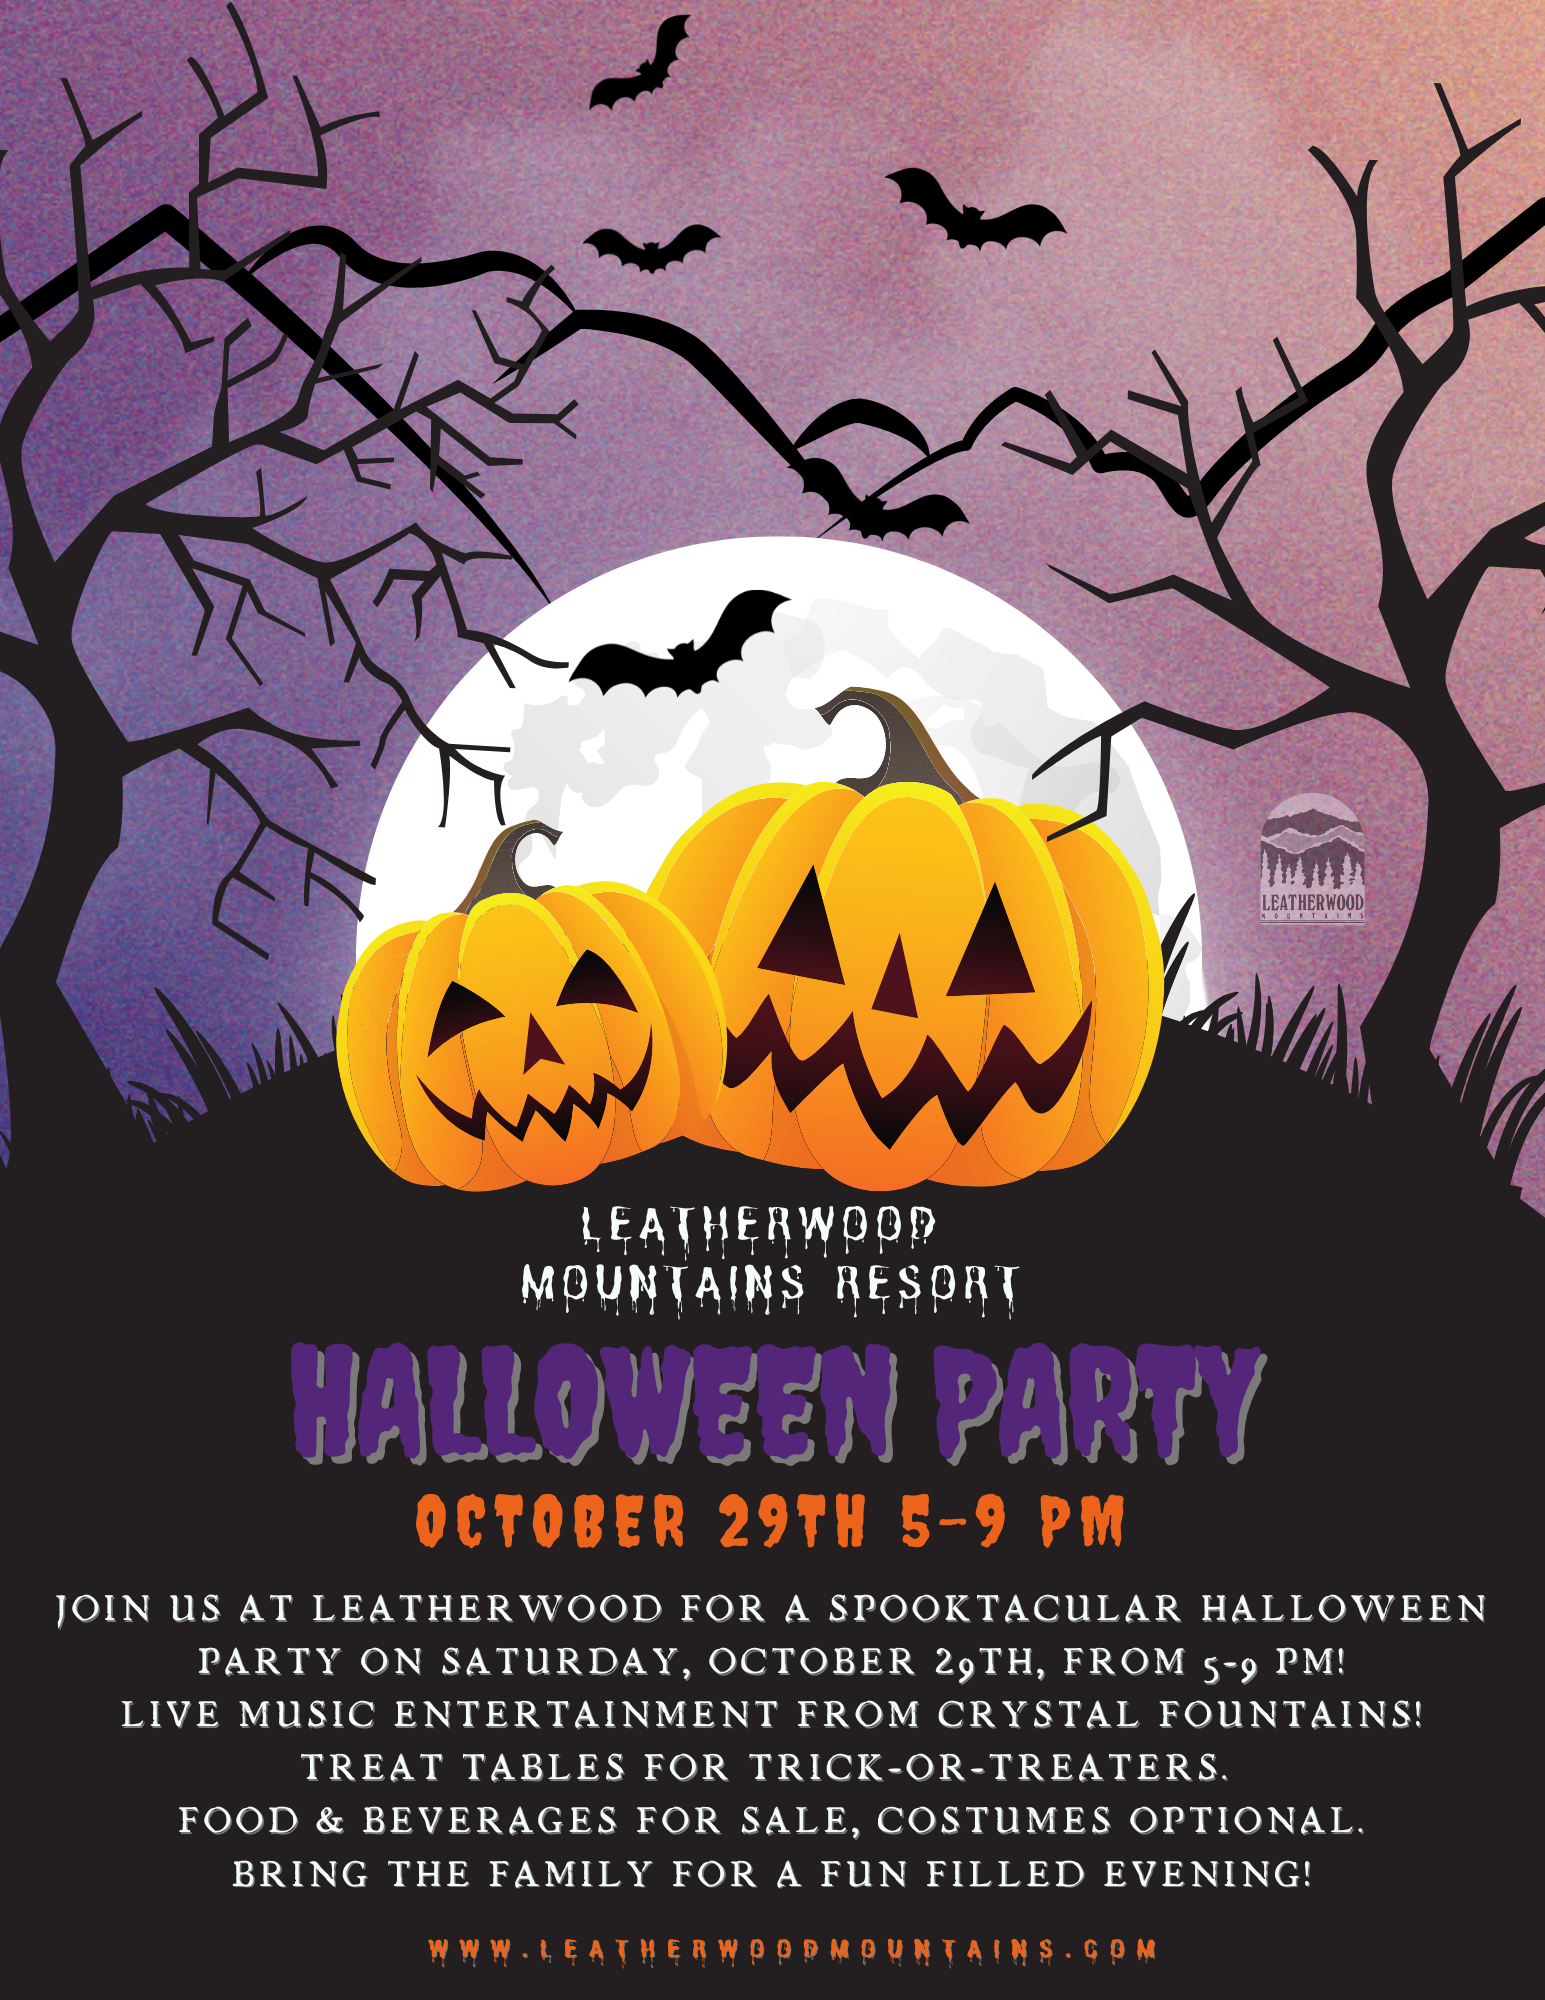 Join us at Leatherwood for a spooktacular Halloween Party on Saturday, October 29th, from 5-9 pm! Live Music entertainment from Crystal Fountains! Treat tables for trick-or-treaters. Food & Beverages for sale, Costumes optional. Bring the family for a fun-filled evening!